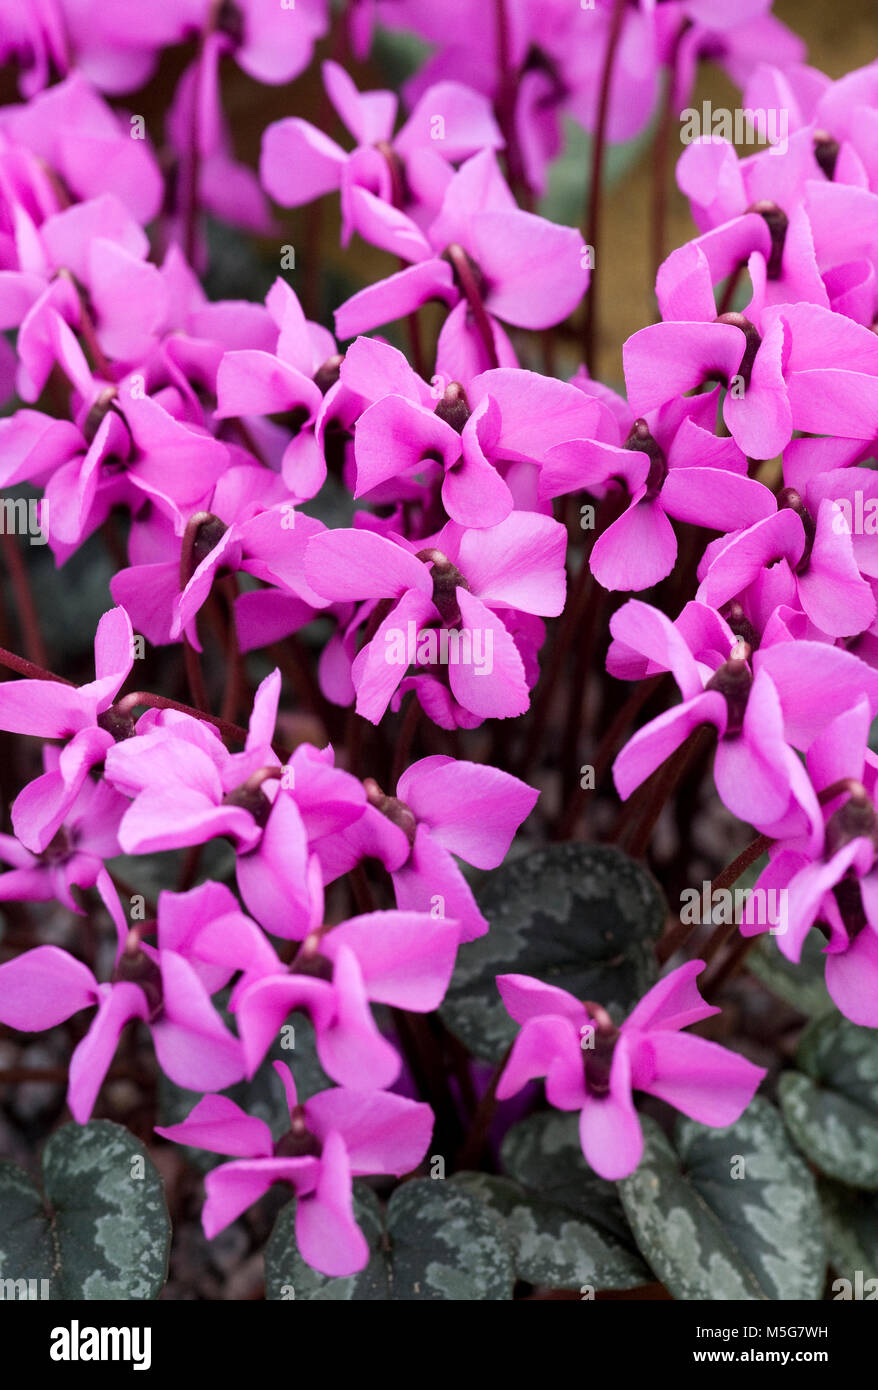 Cyclamen alpinum flowers growing in a protected environment. Stock Photo